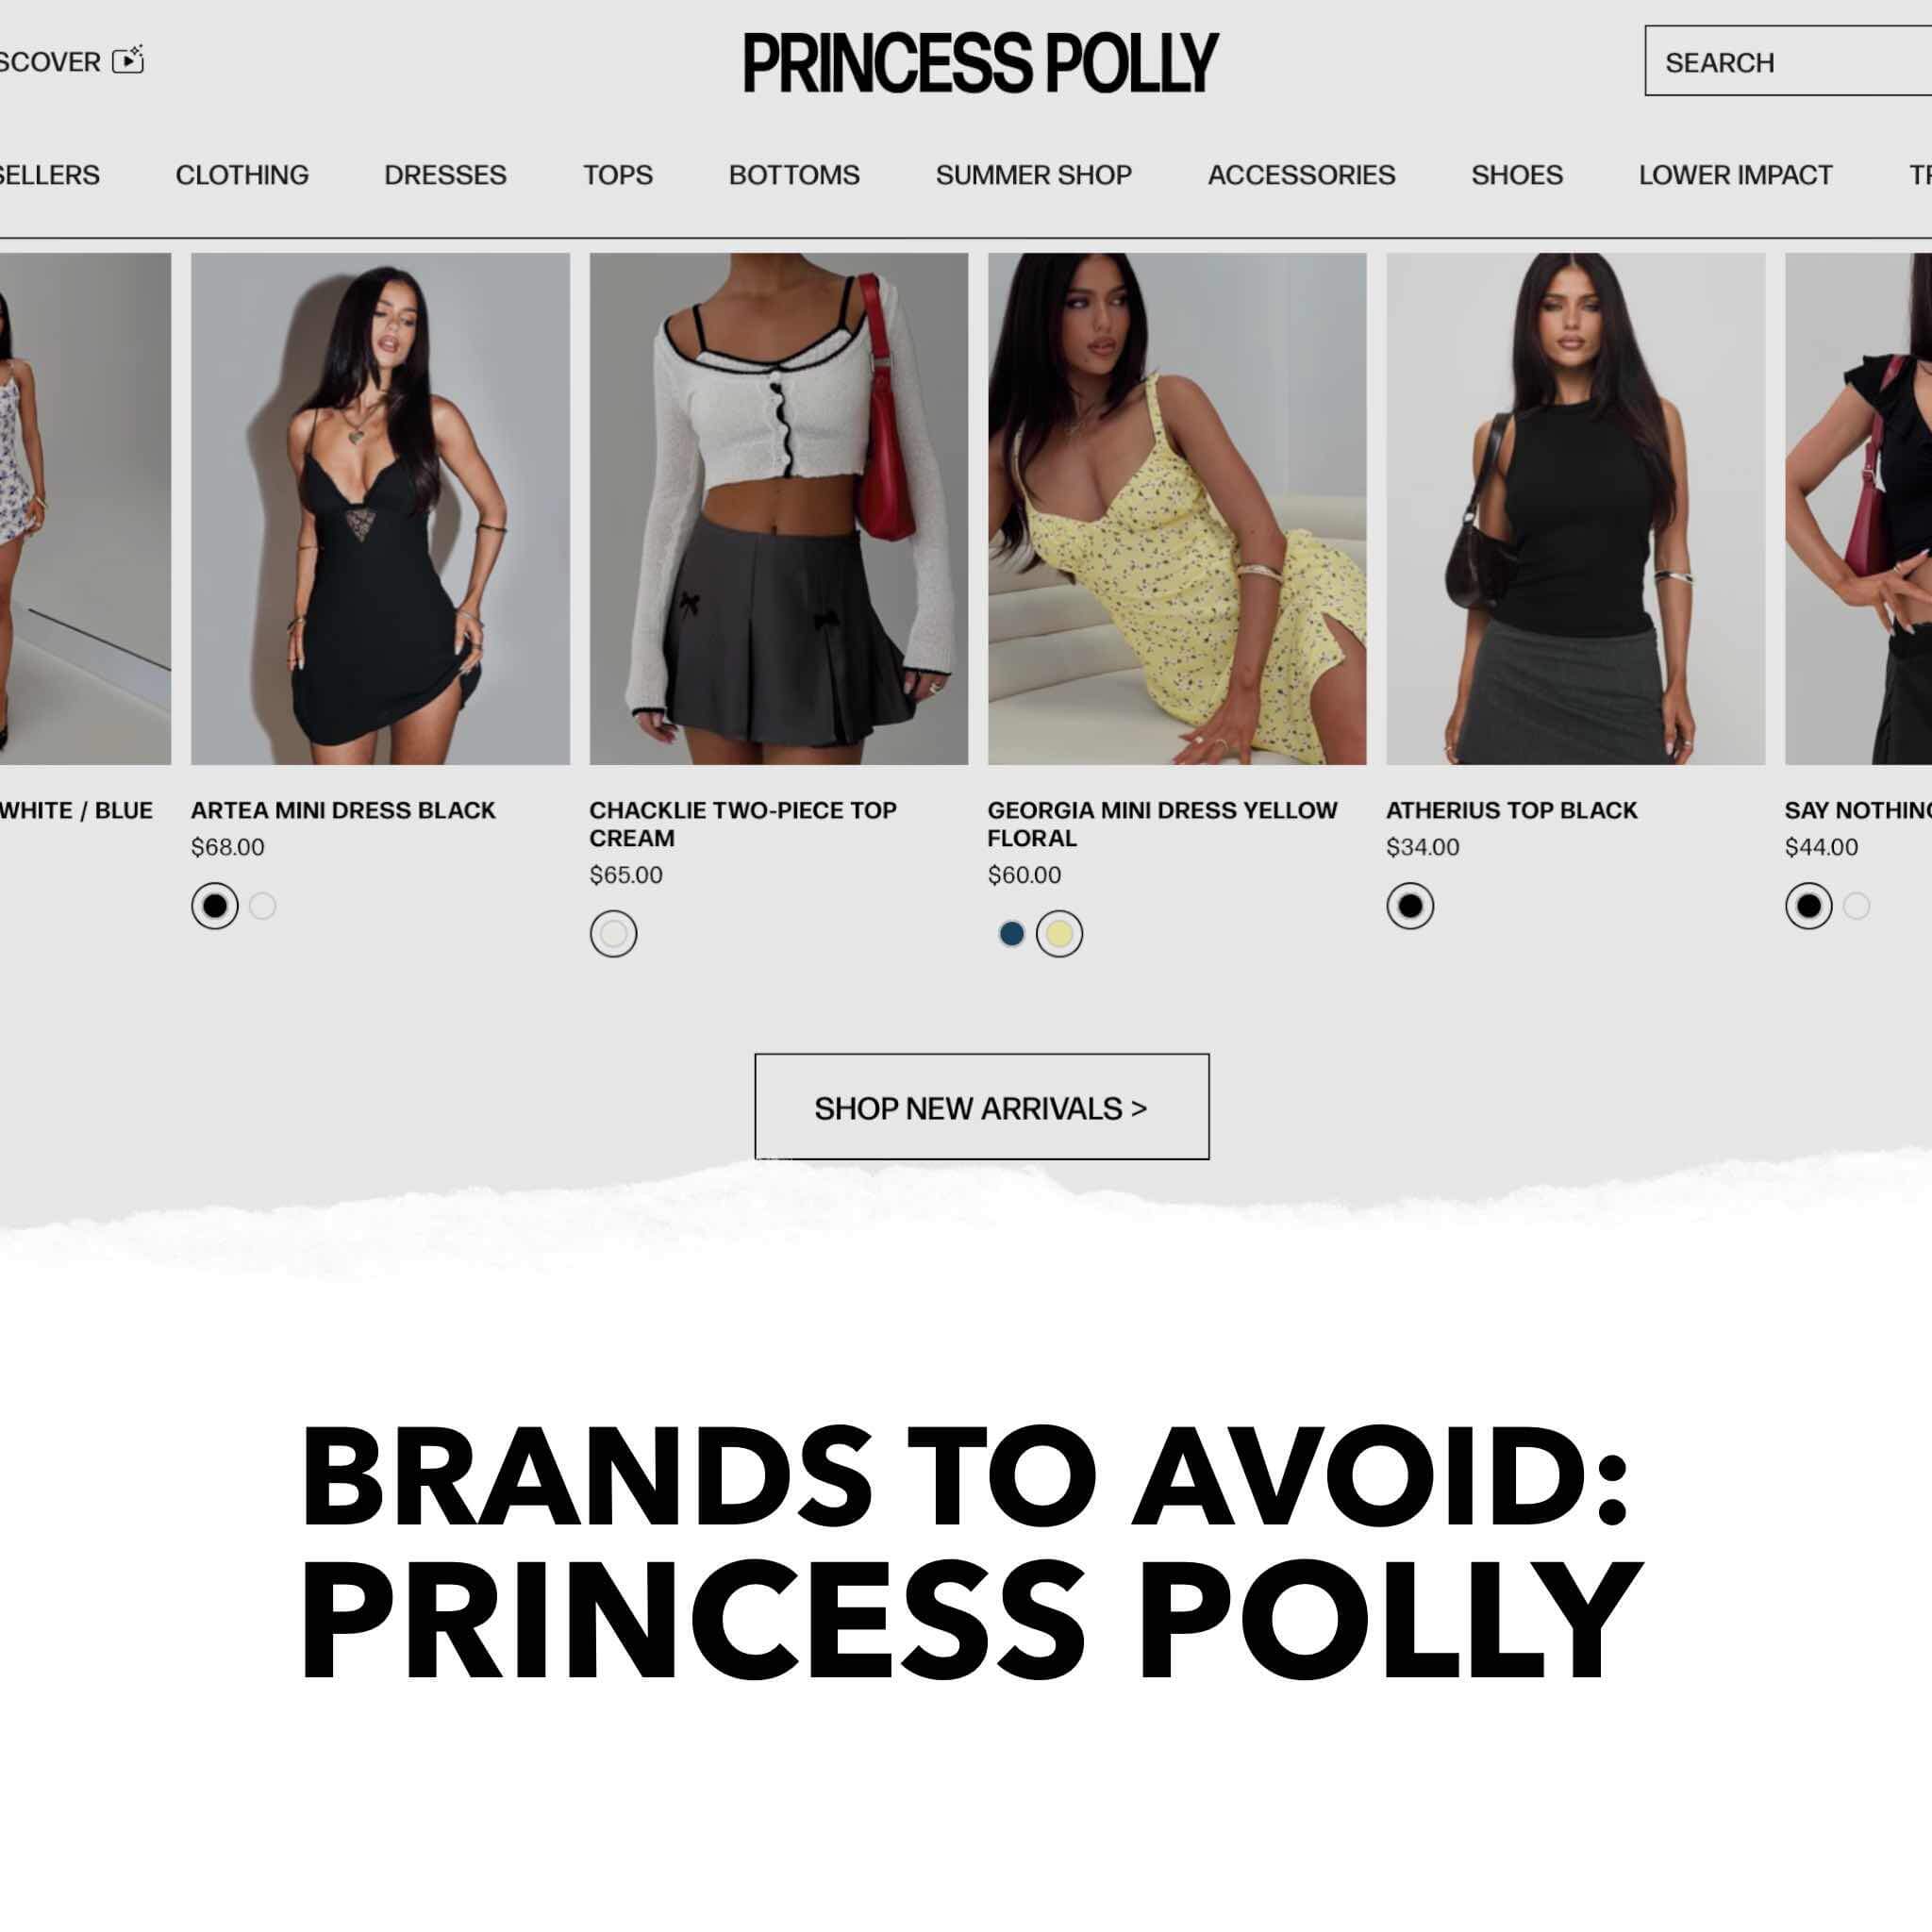 Brands to Avoid Princess Polly